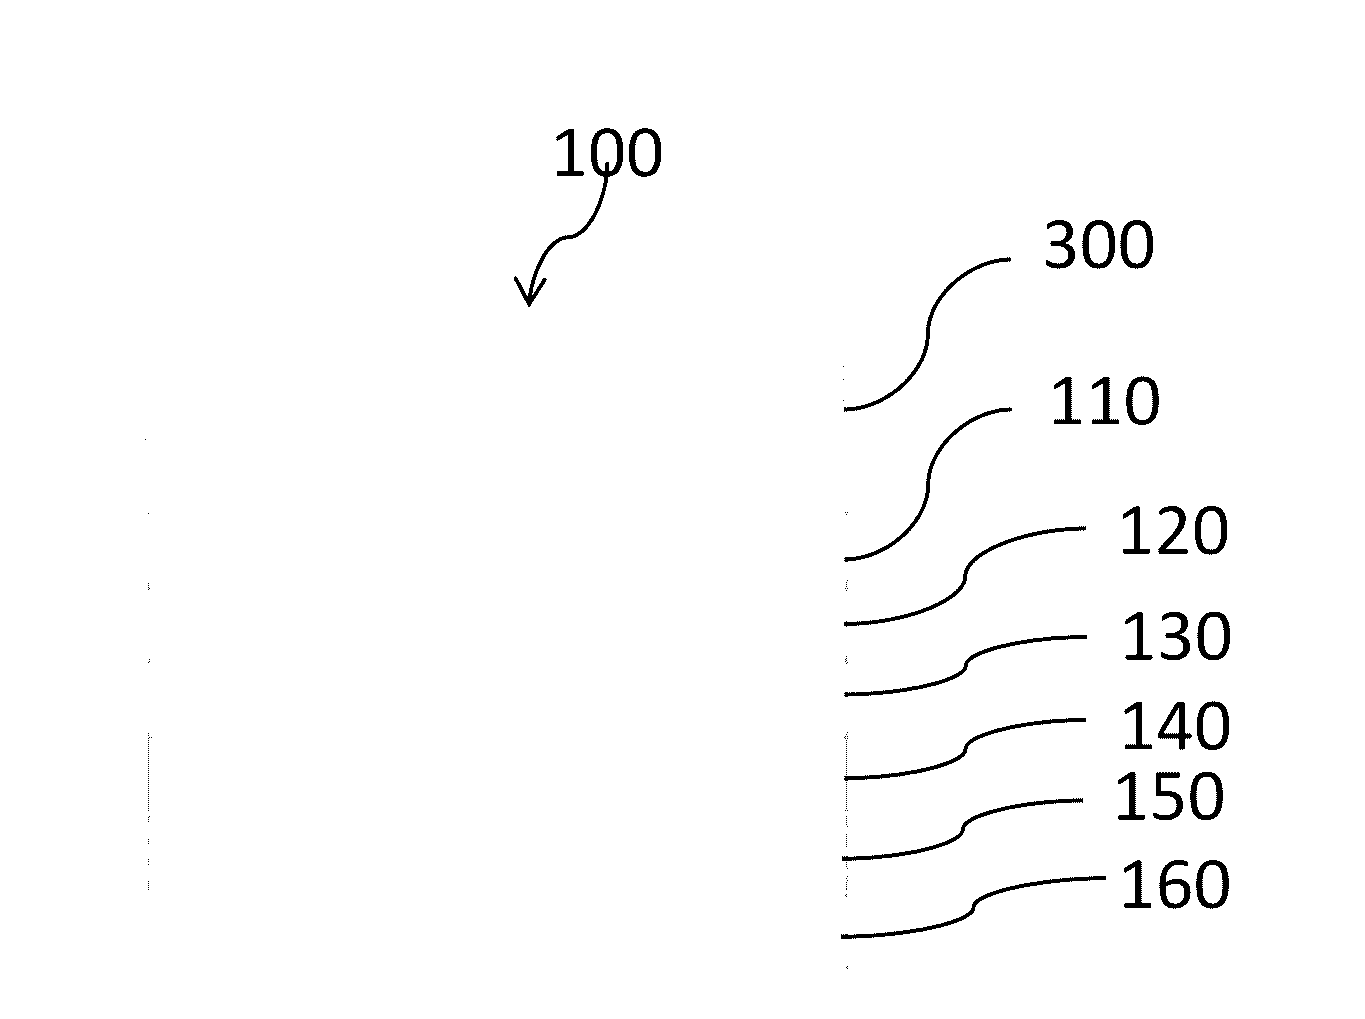 Thin film adhesive labels and methods of making thereof